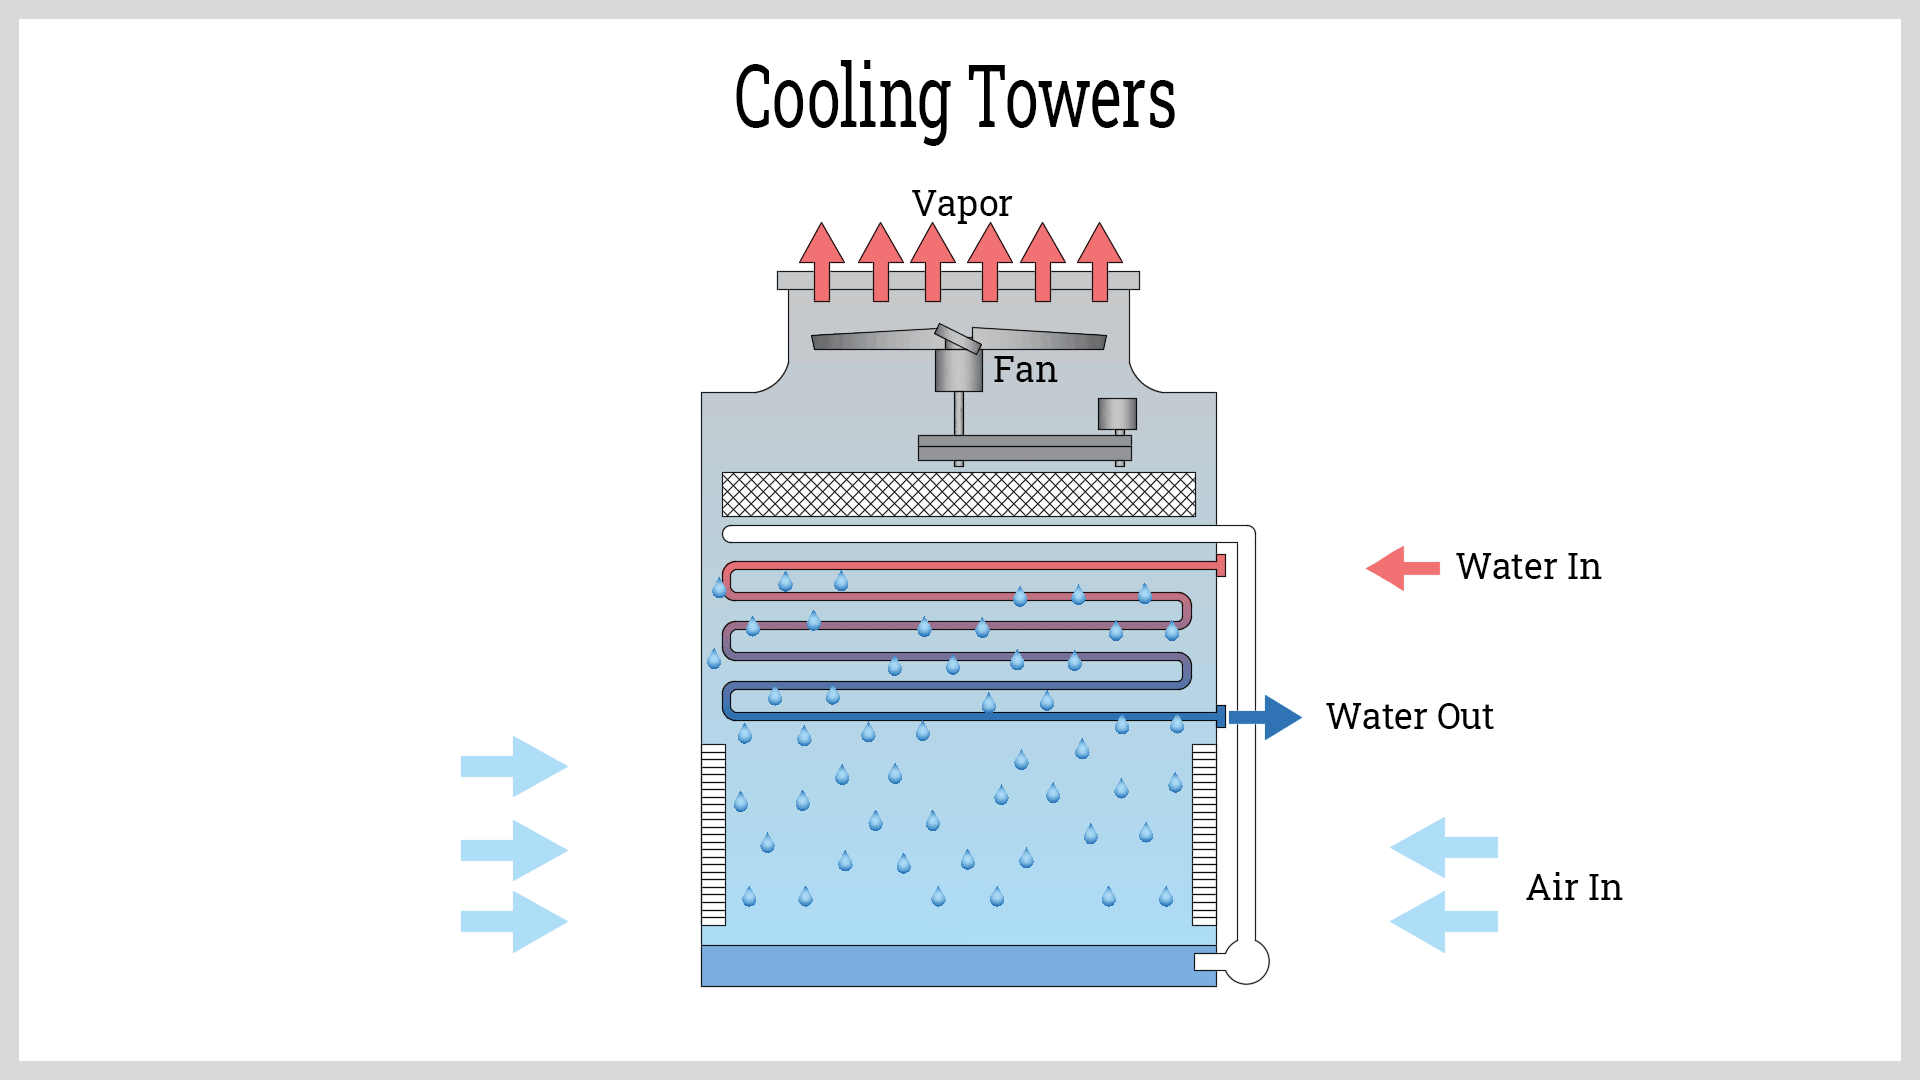 How does a Cooling Tower work?